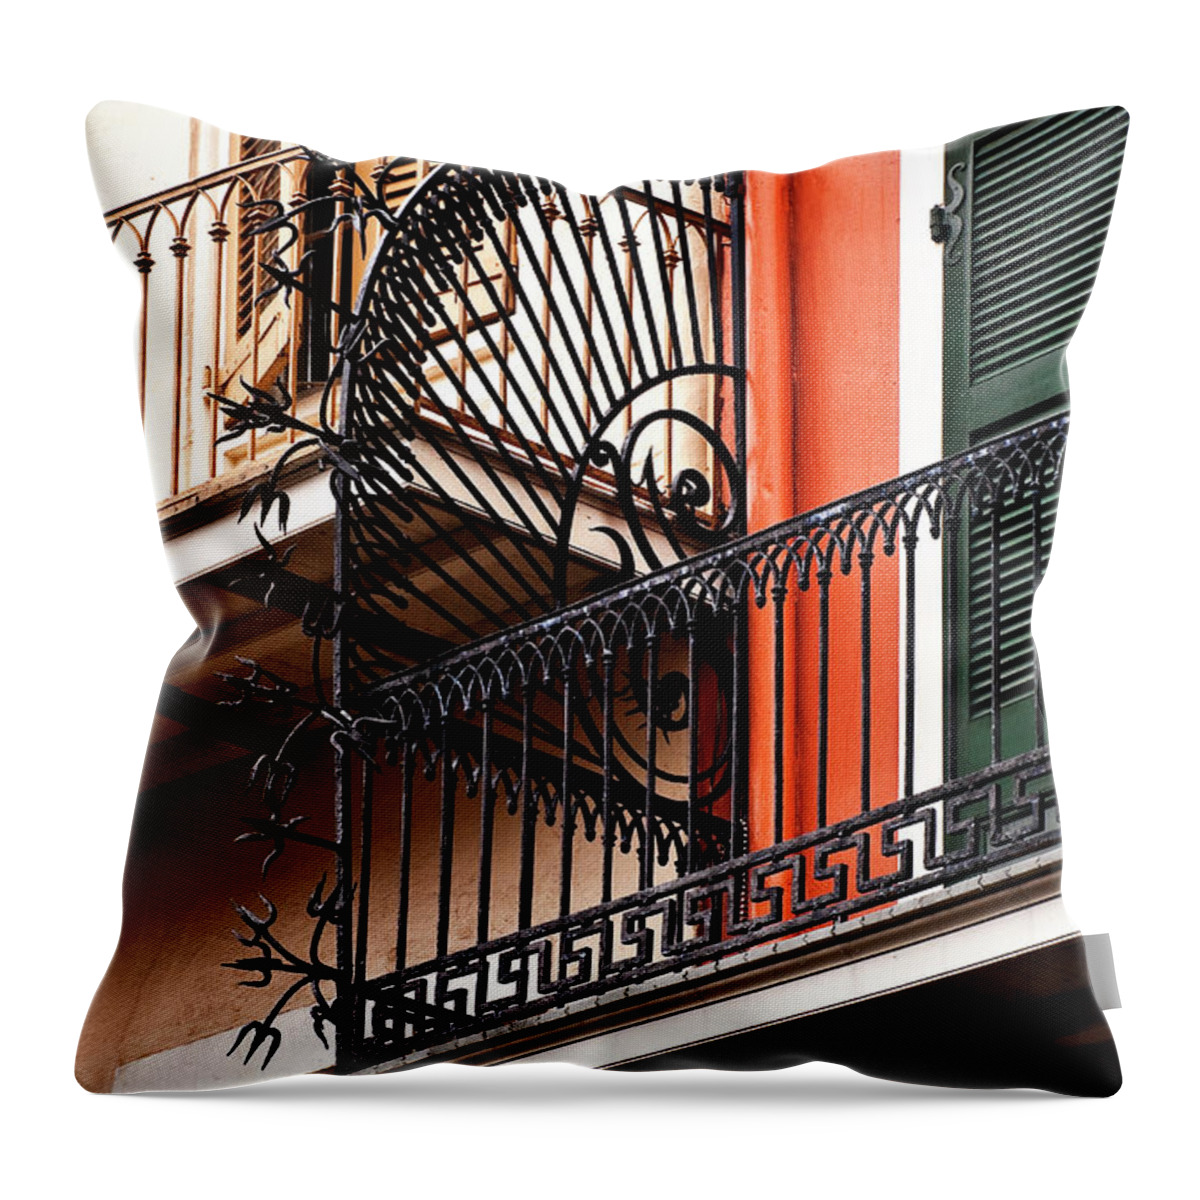 Balcony Throw Pillow featuring the photograph New Orleans Balcony by Kathleen K Parker